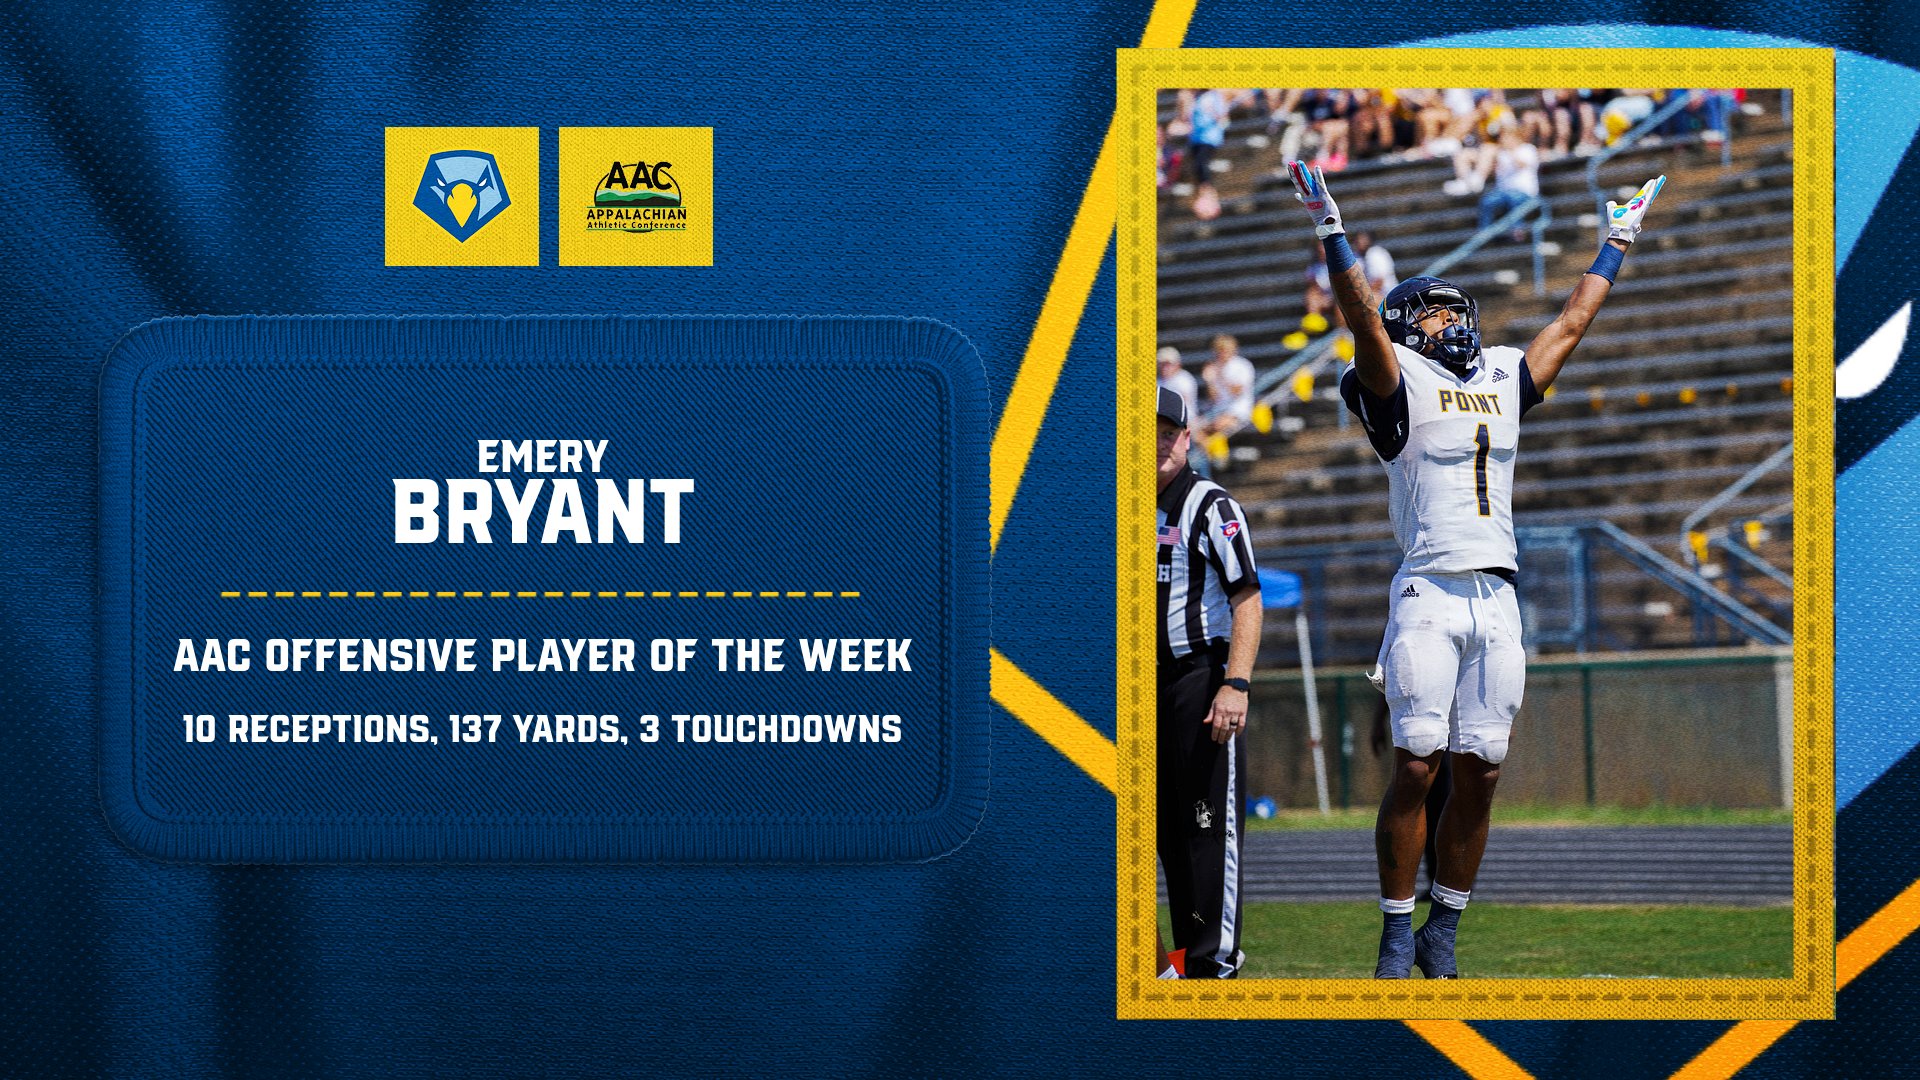 Emery Bryant’s Three touchdown weekend earns him AAC Offensive Player of the Week